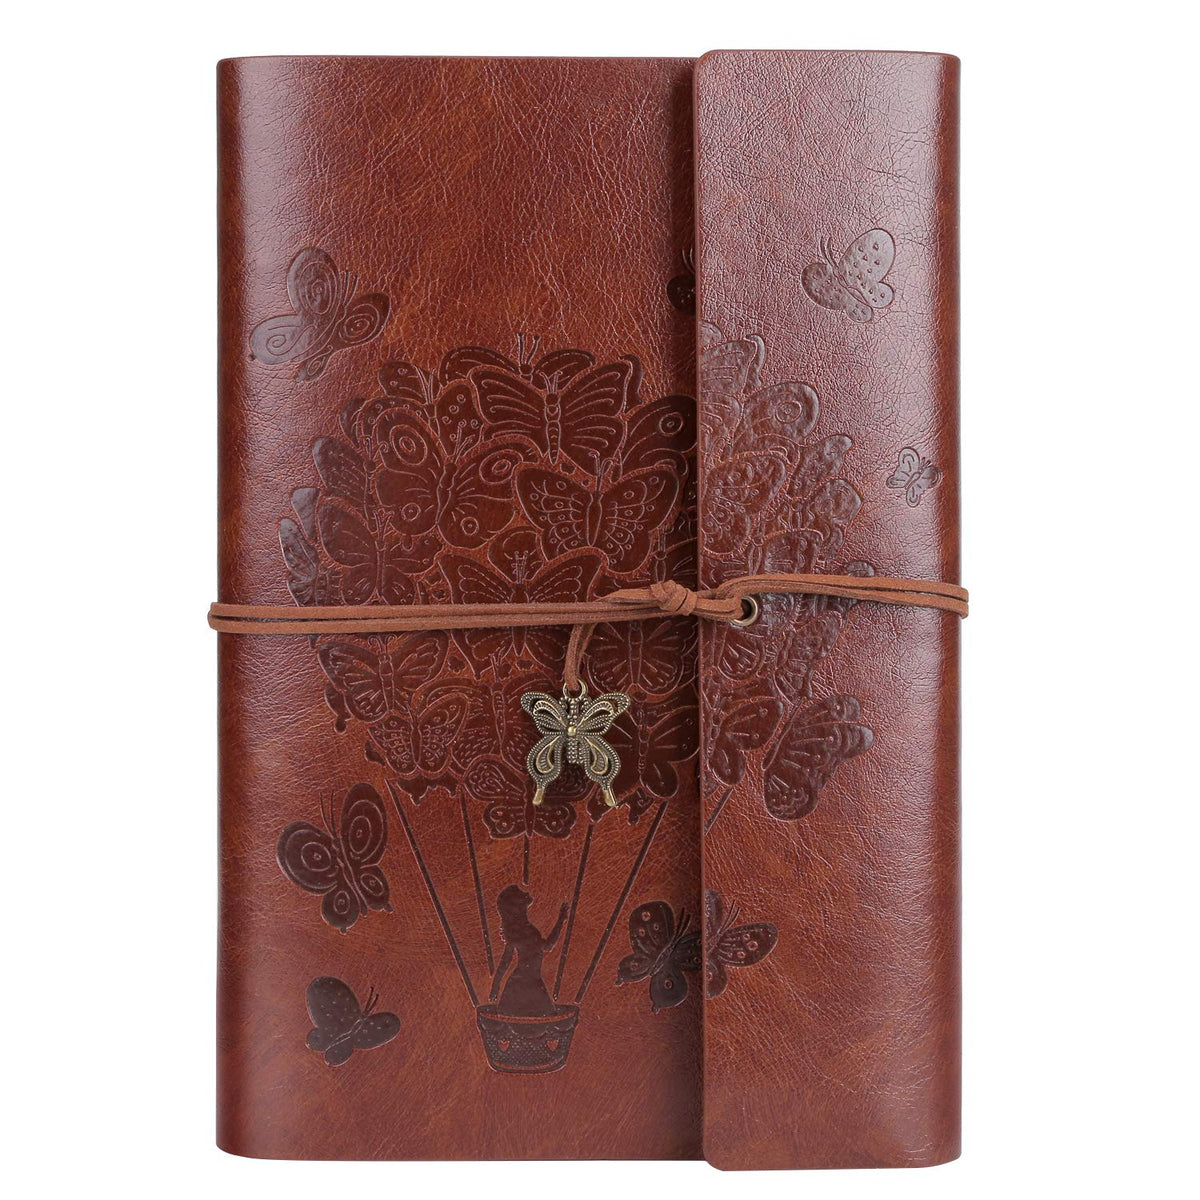 Leather Journal Notebook, Travel Spiral Bound Refillable Diary Notebook, Gifts for Women with Lined Paper Classic Embossed Retro Pendants A5 A5 16 x 23.5 cm (Brown)